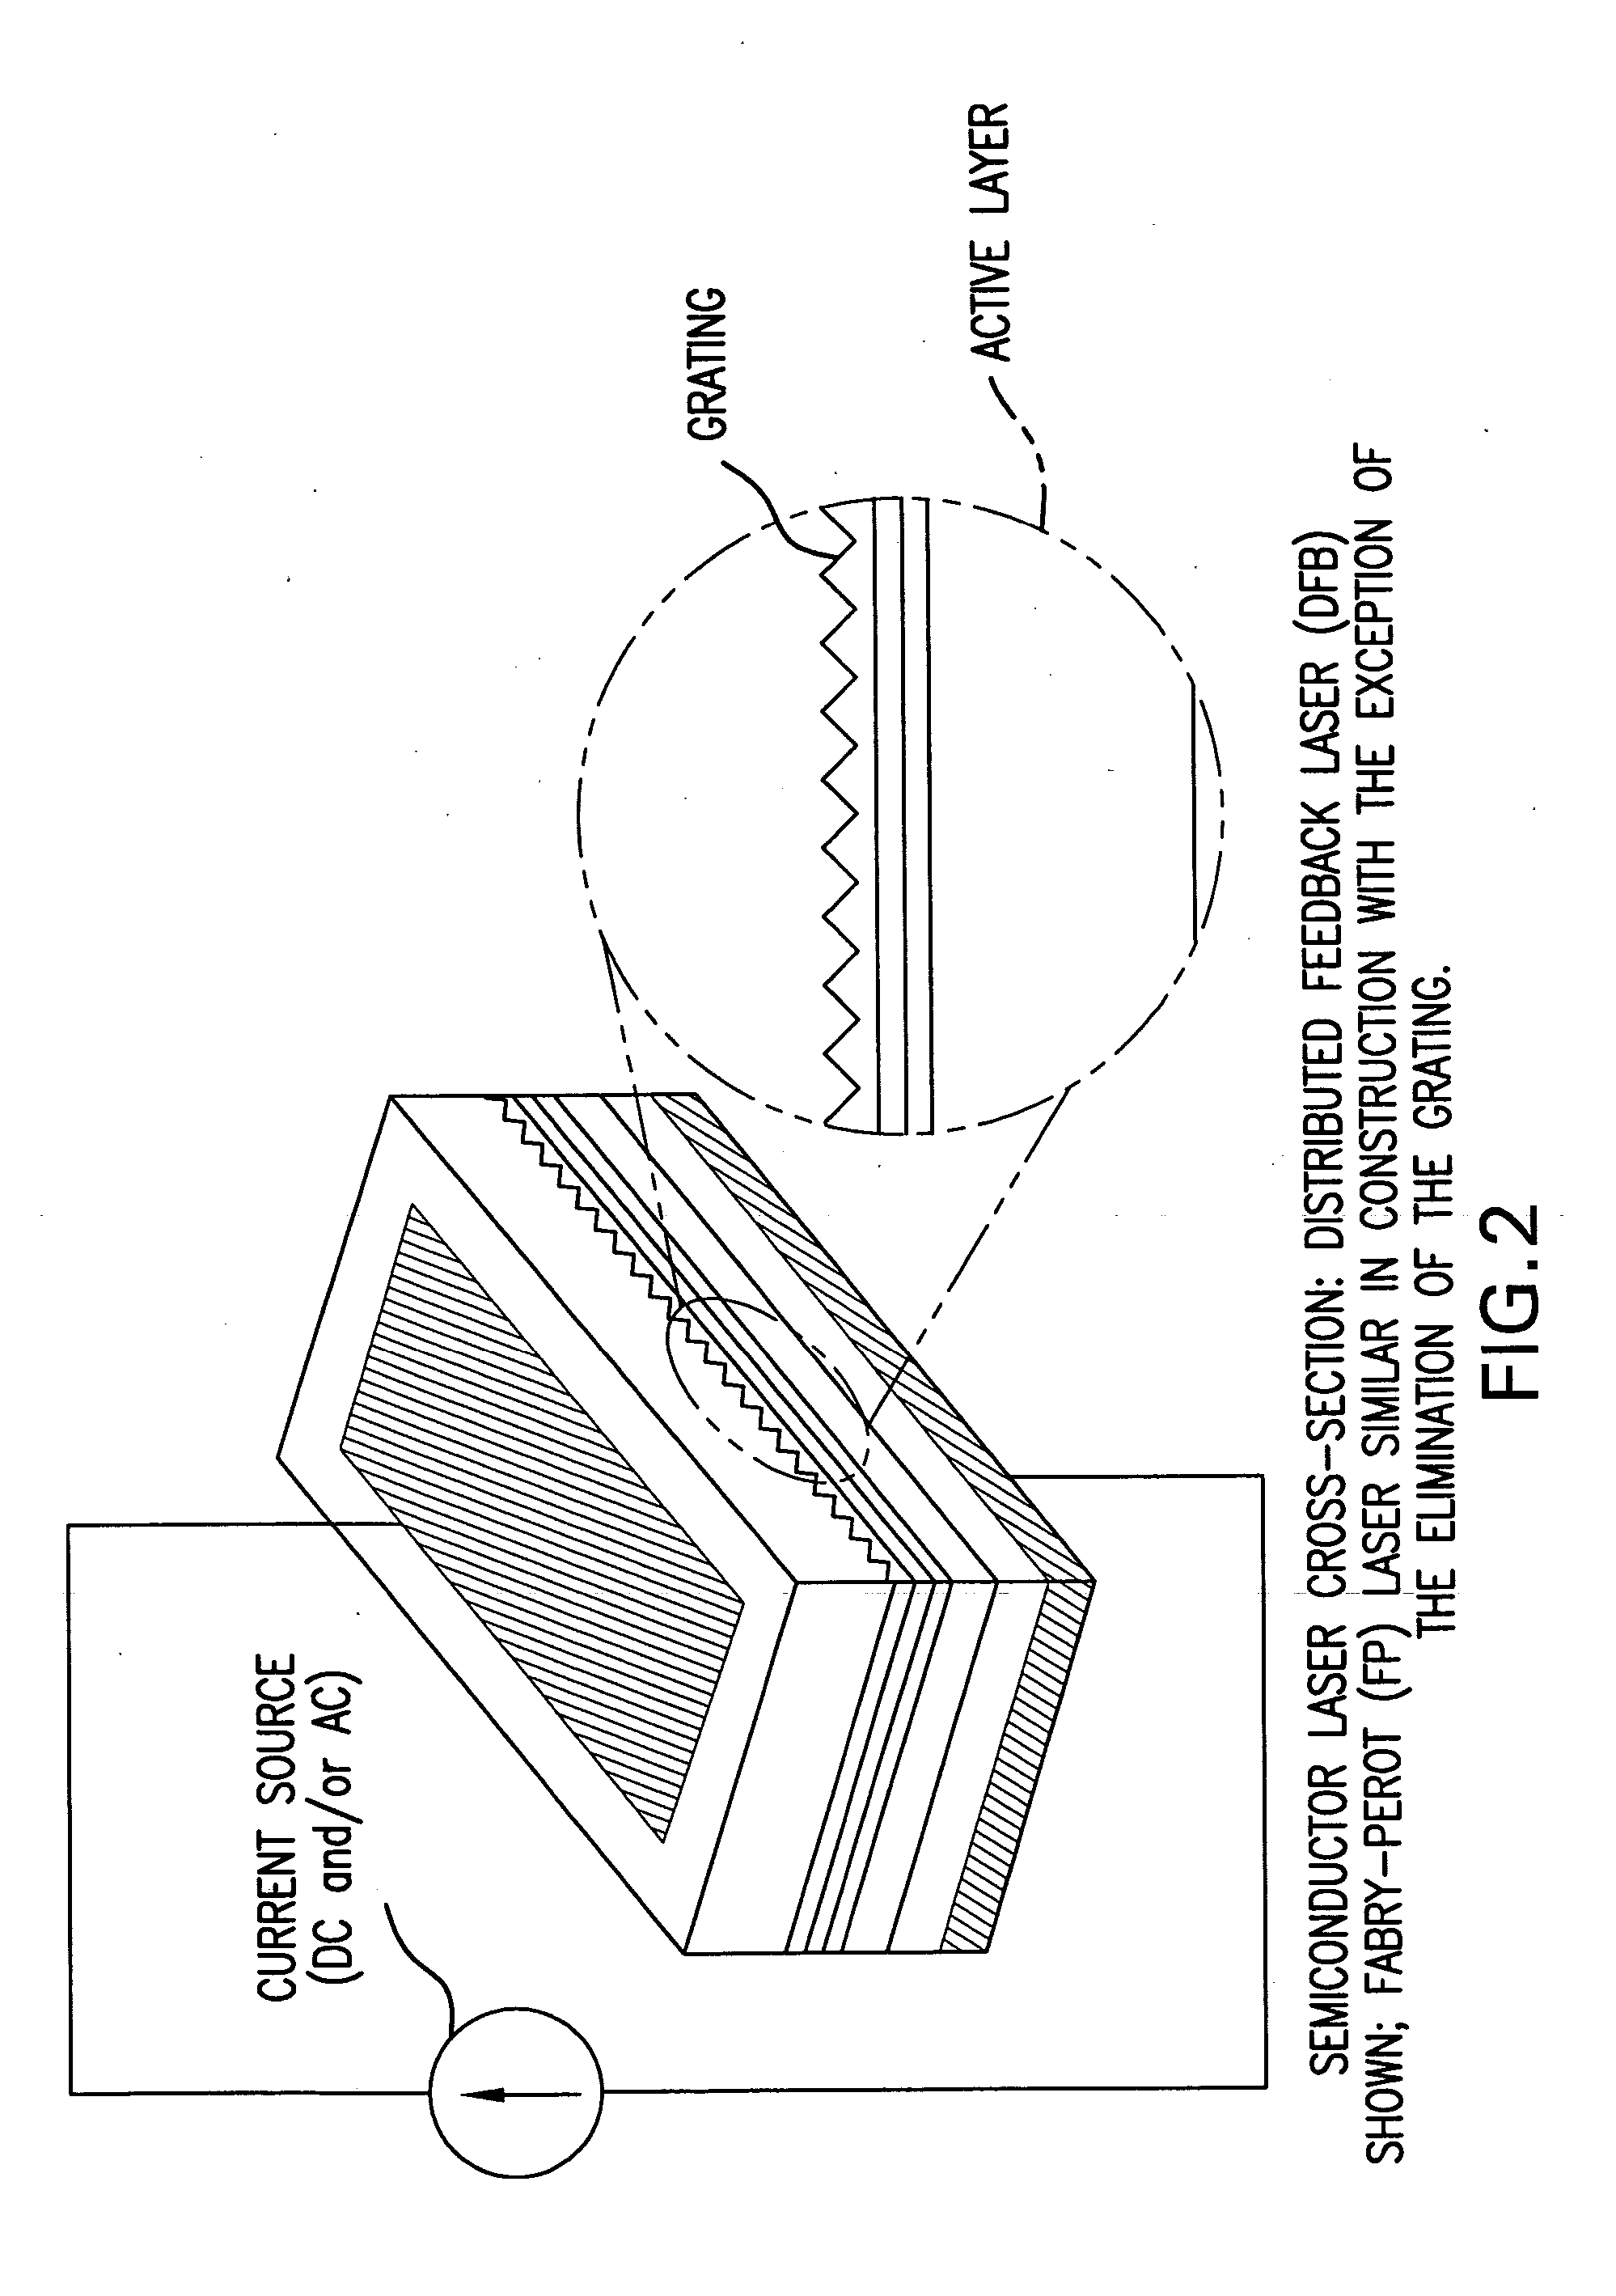 Directly modulated laser optical transmission system